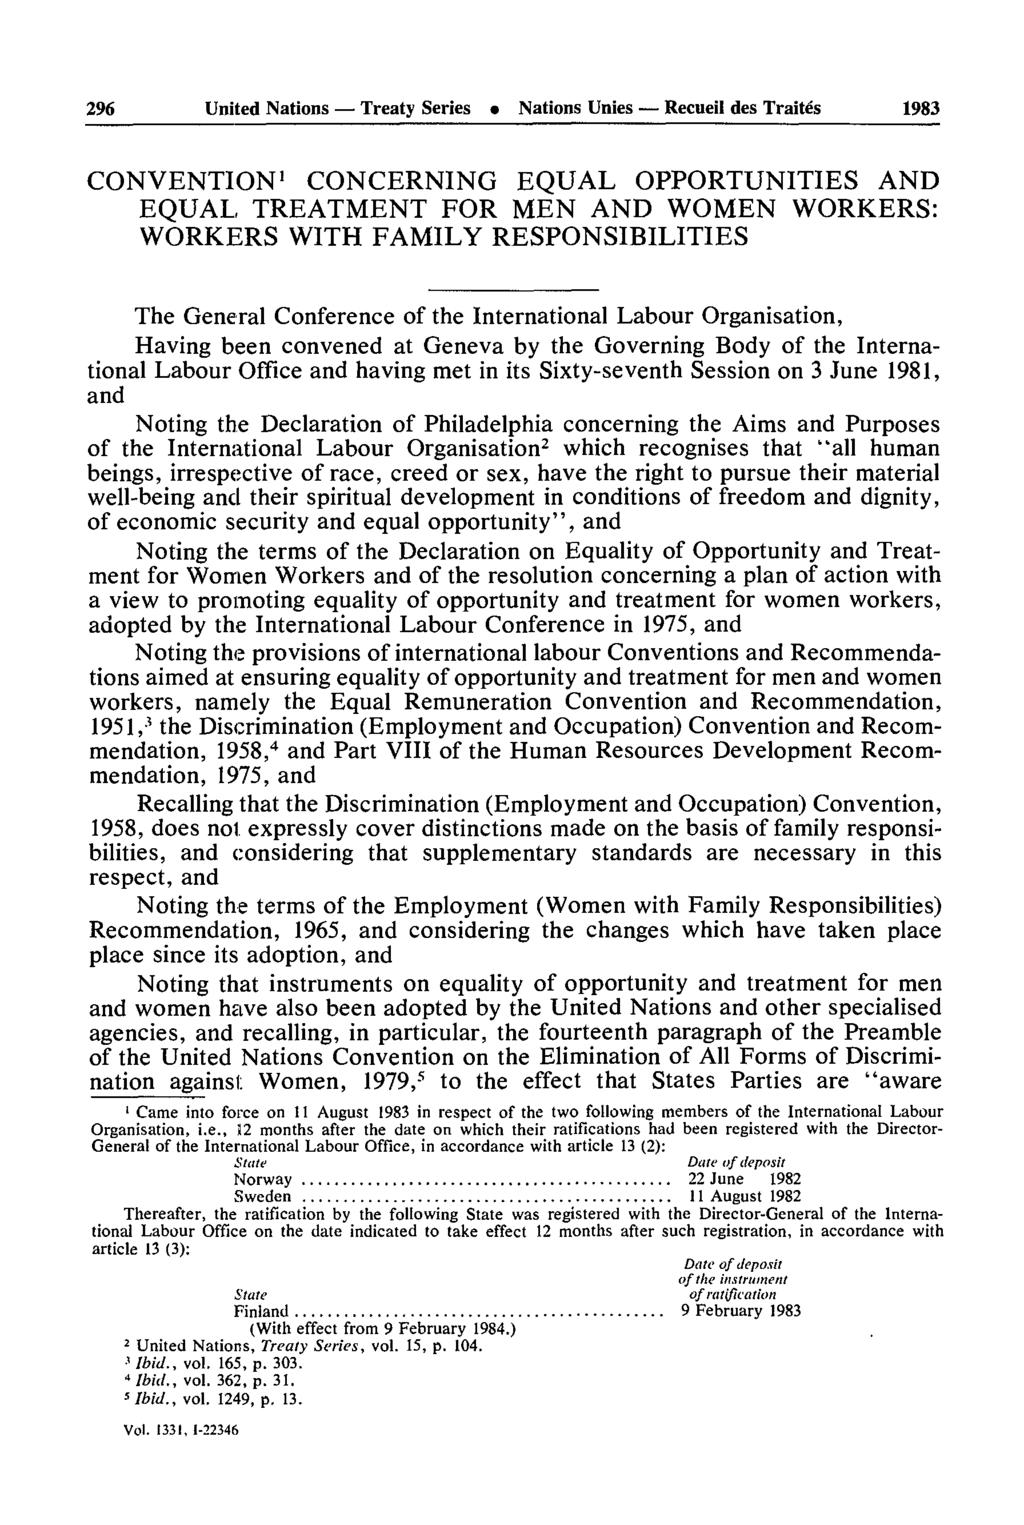 296 United Nations Treaty Series Nations Unies Recueil des Traités 1983 CONVENTION 1 CONCERNING EQUAL OPPORTUNITIES AND EQUAL TREATMENT FOR MEN AND WOMEN WORKERS: WORKERS WITH FAMILY RESPONSIBILITIES